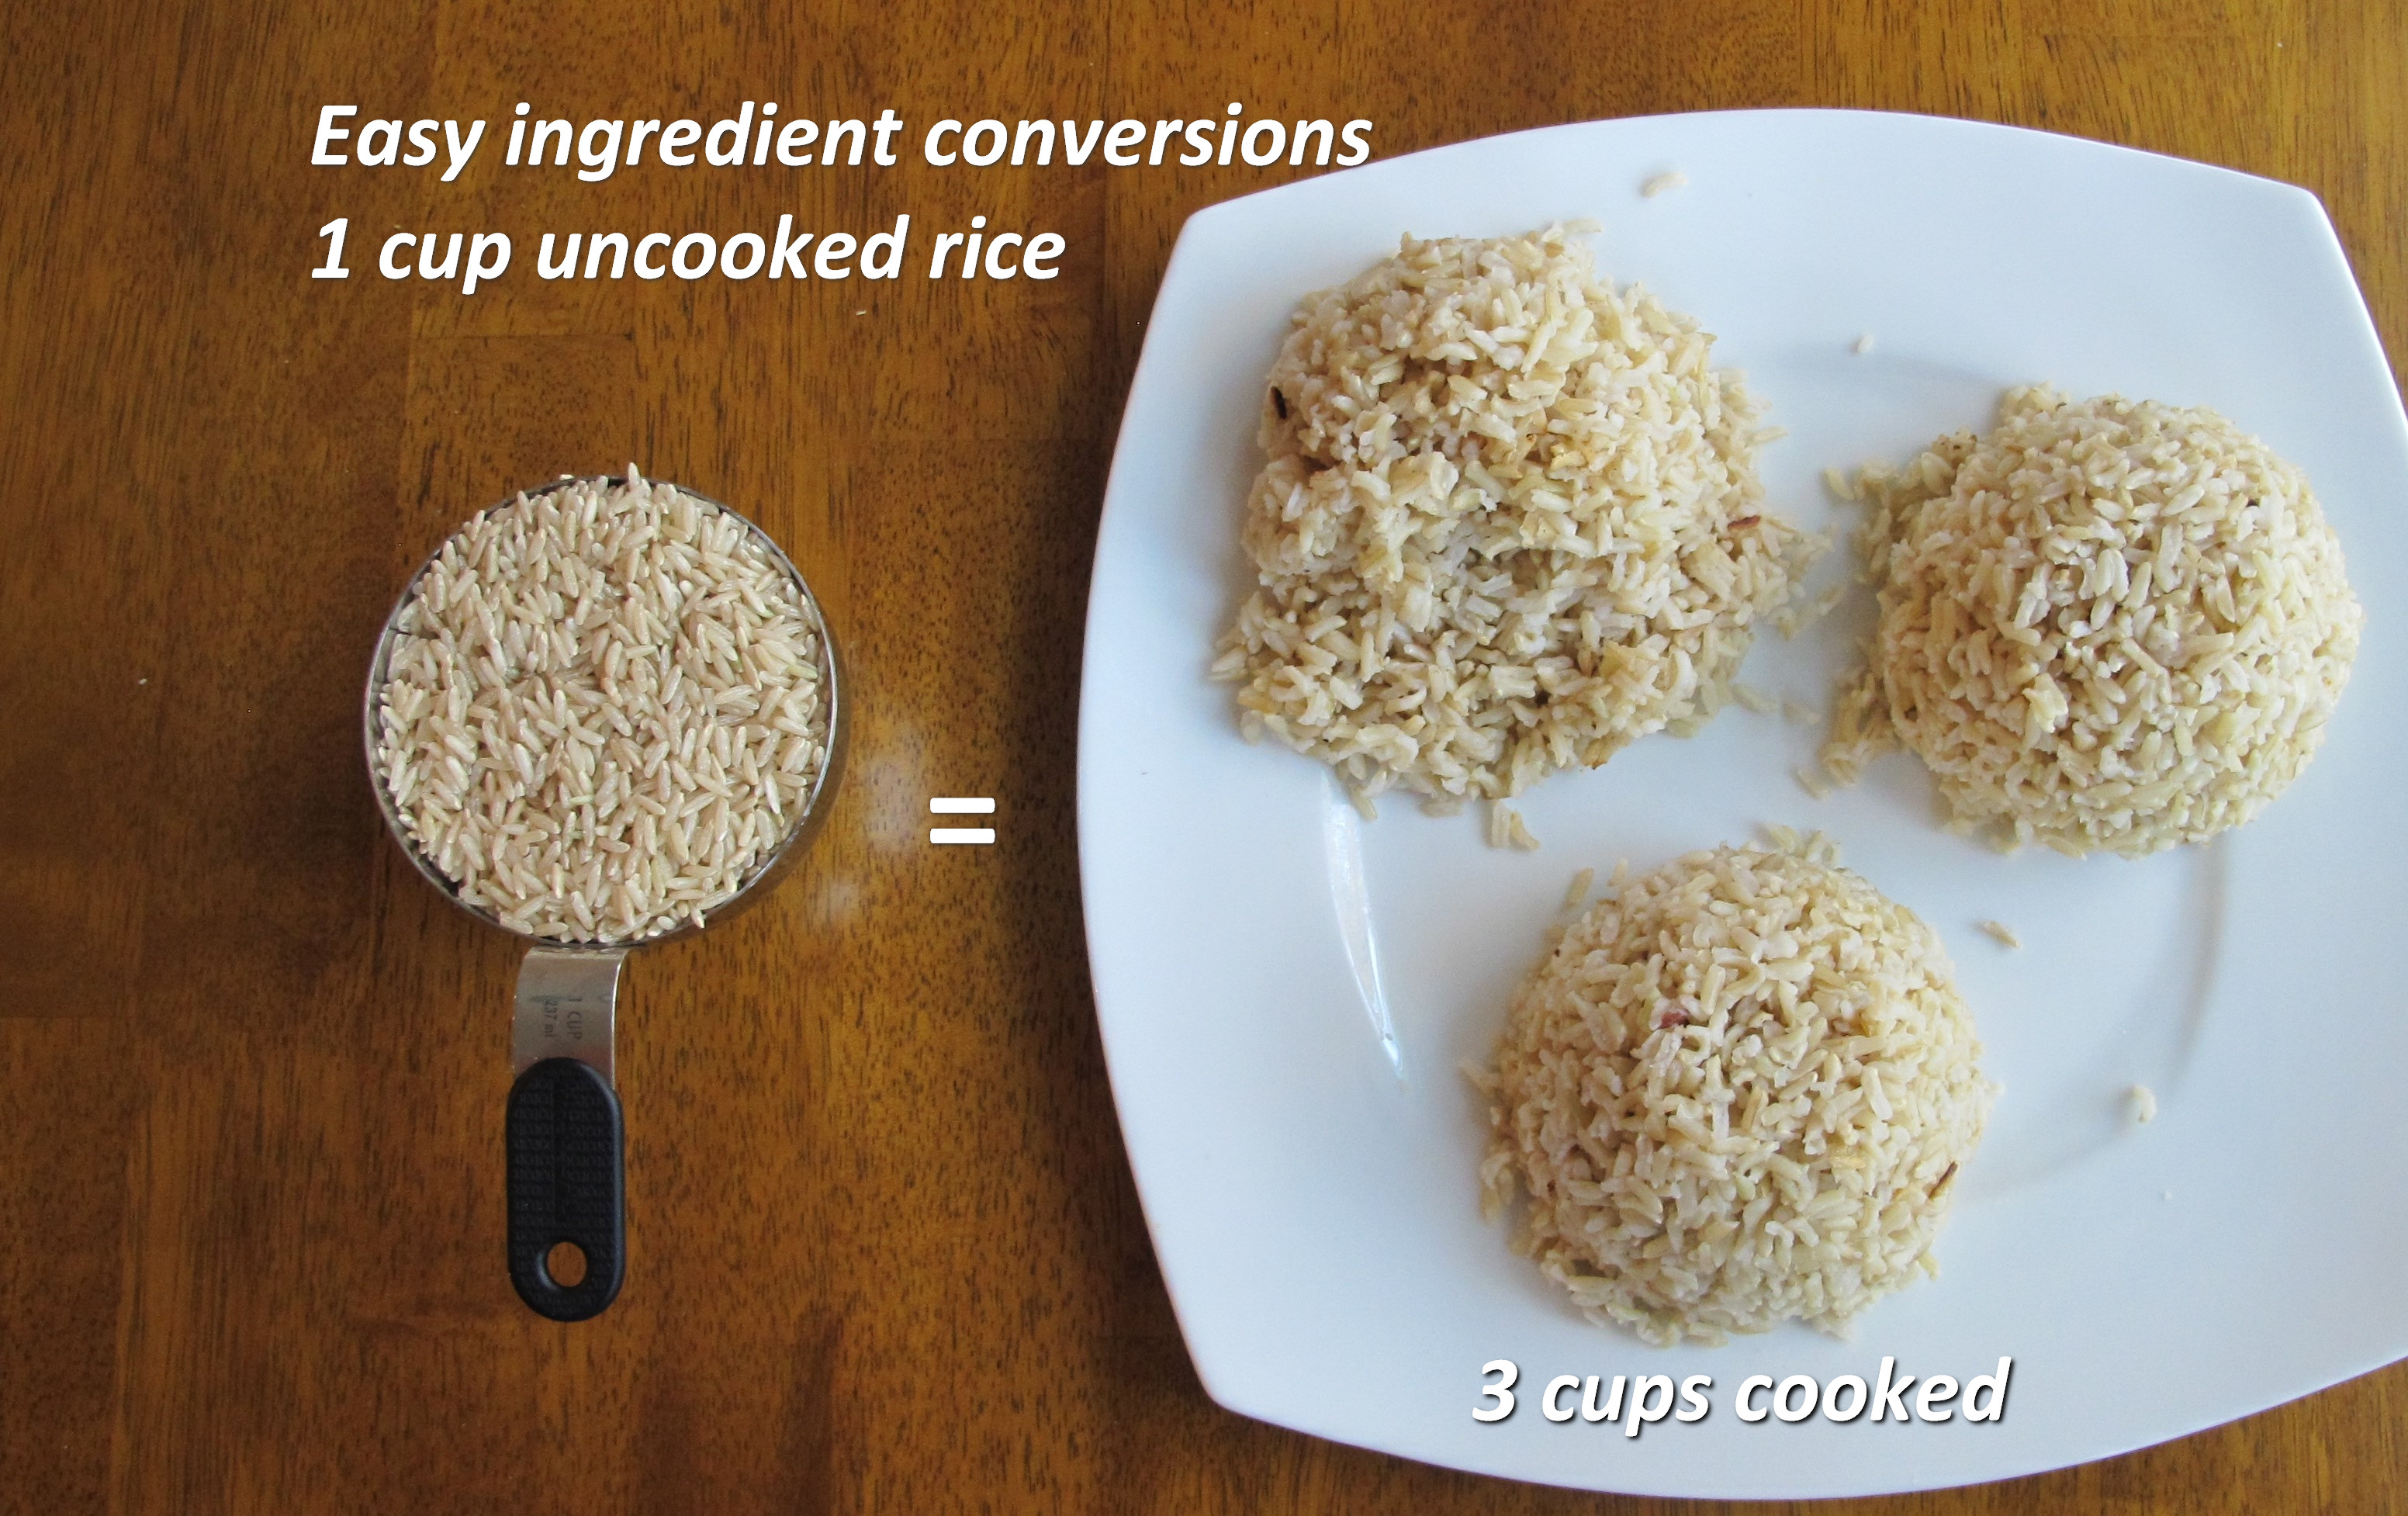 1/2 Cup Dry Rice is How Much Cooked? 